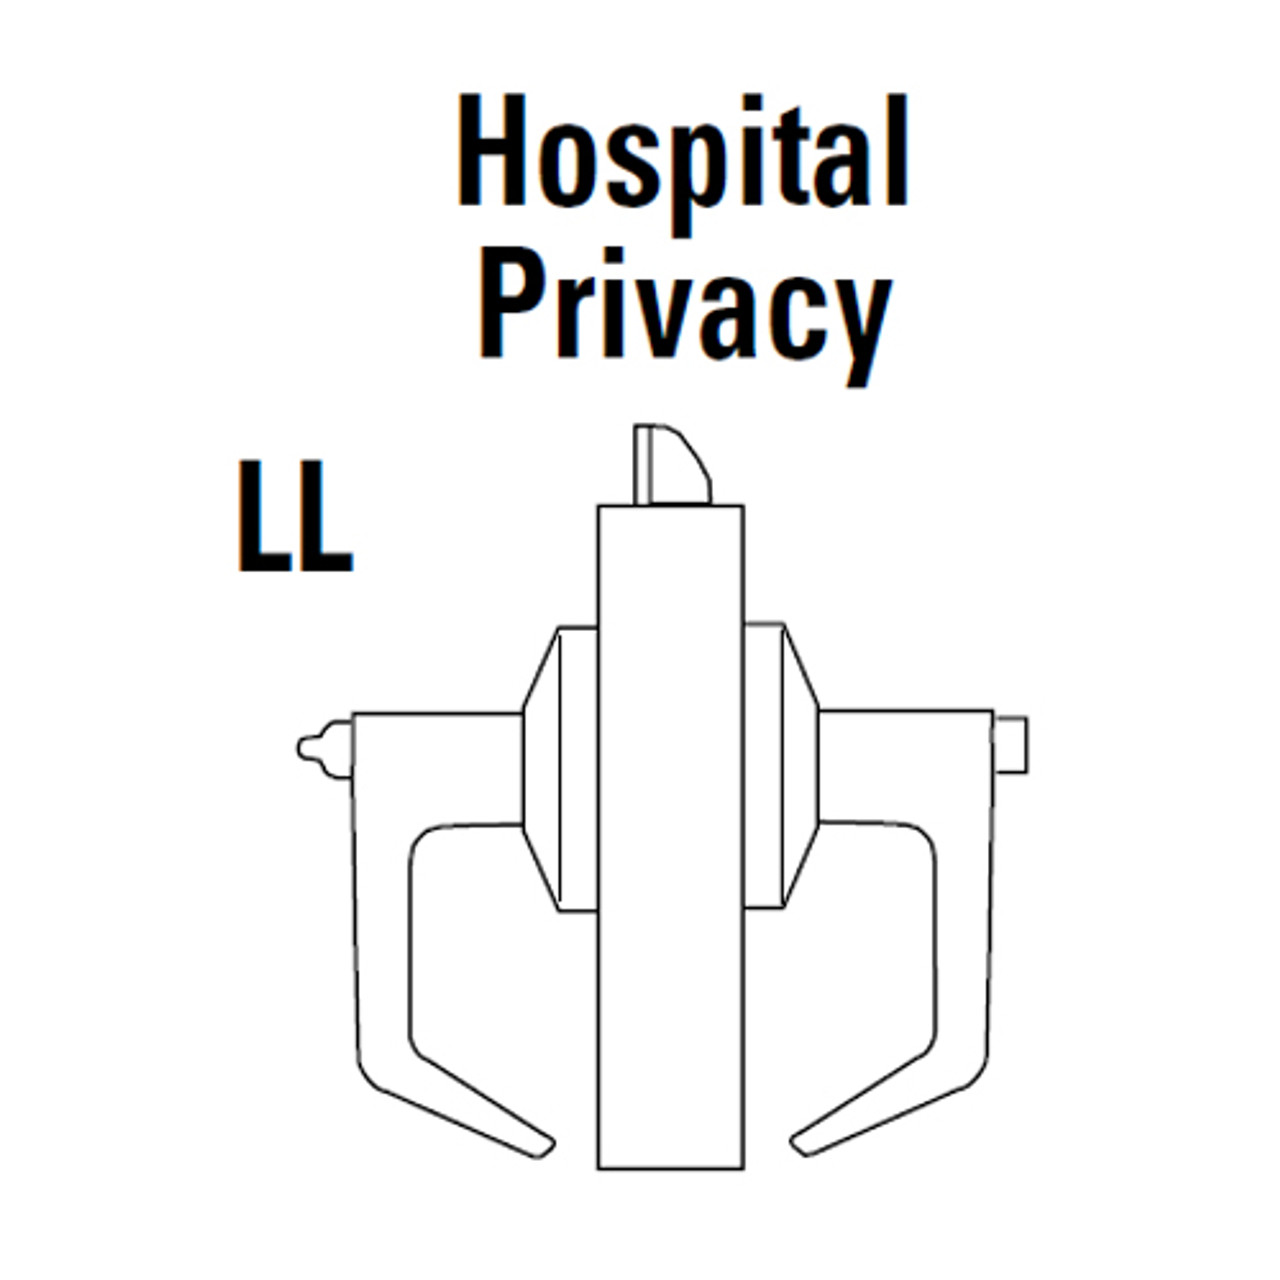 9K50LL15LSTK613 Best 9K Series Hospital Privacy Heavy Duty Cylindrical Lever Locks with Contour Angle with Return Lever Design in Oil Rubbed Bronze